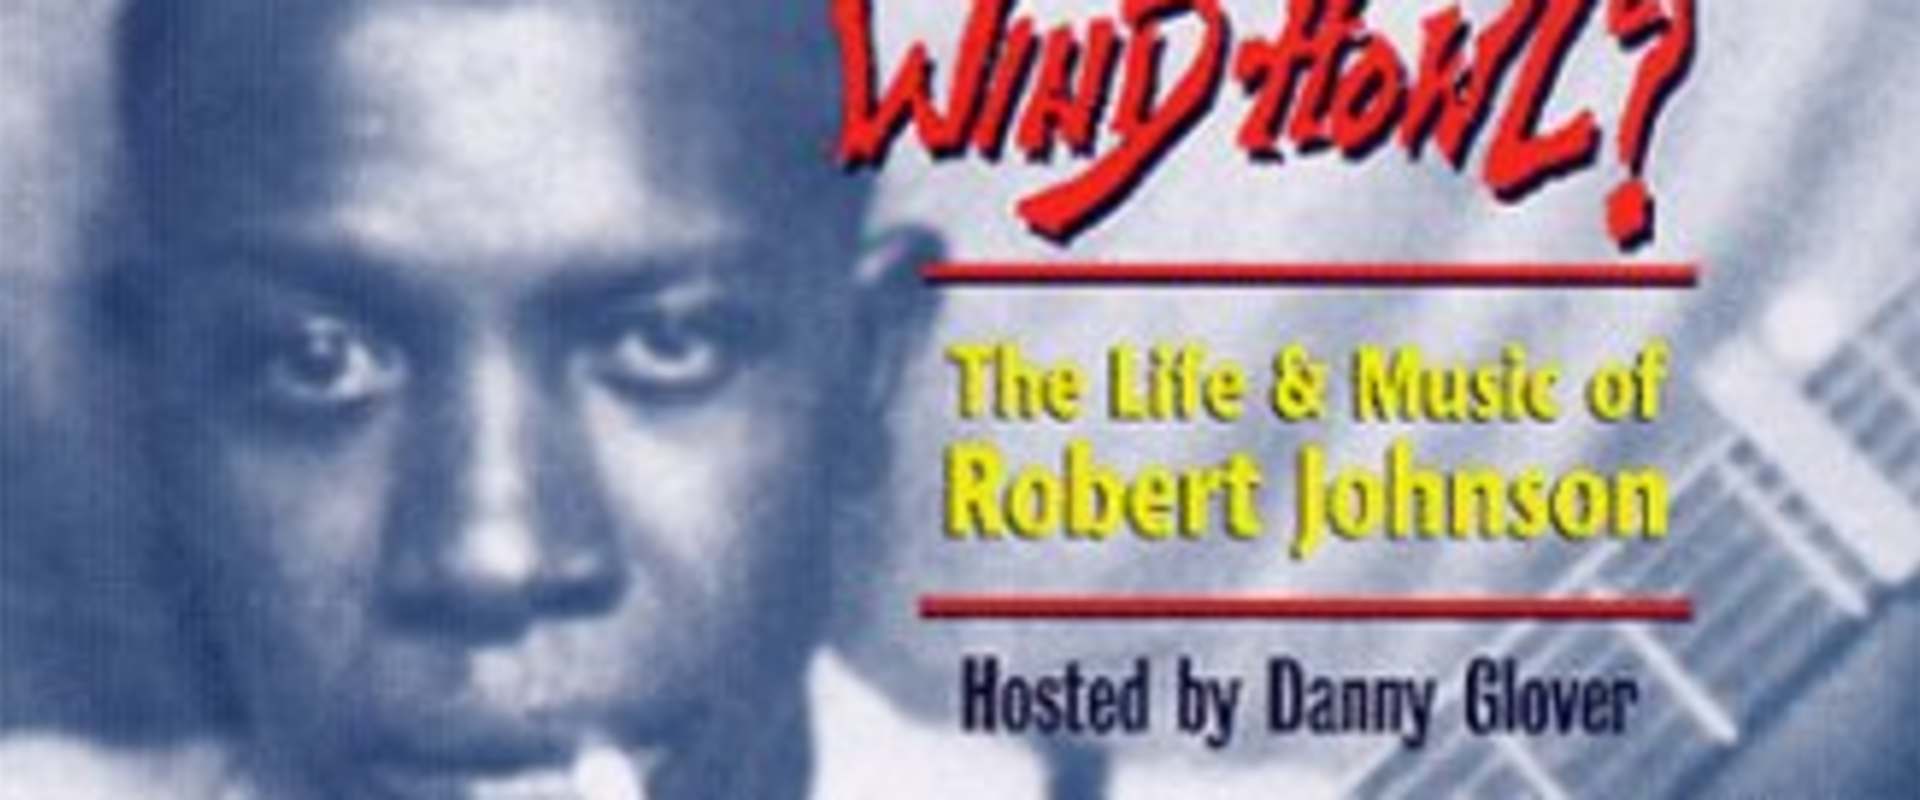 Can't You Hear the Wind Howl? The Life & Music of Robert Johnson background 1